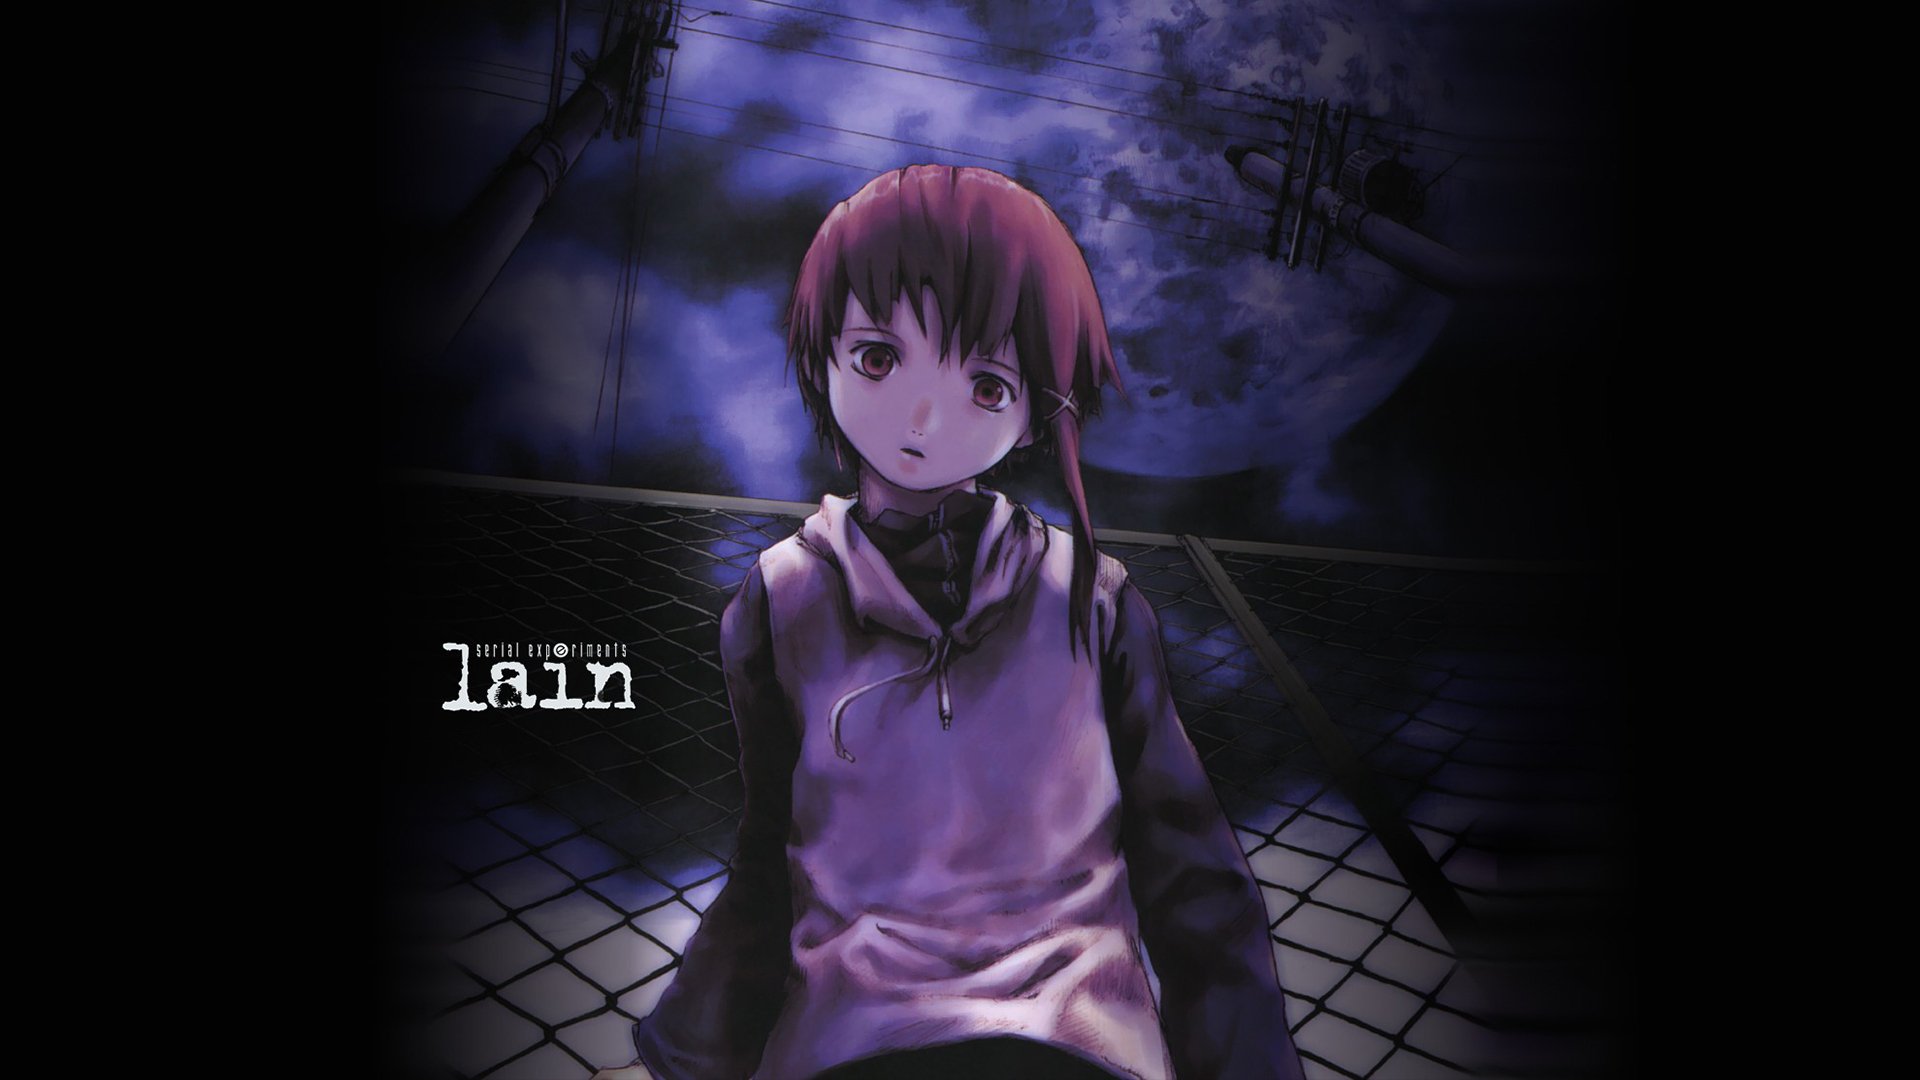 Serial Experiments Lain Hd Wallpaper Background Image 1920x1080 Id 956388 Wallpaper Abyss